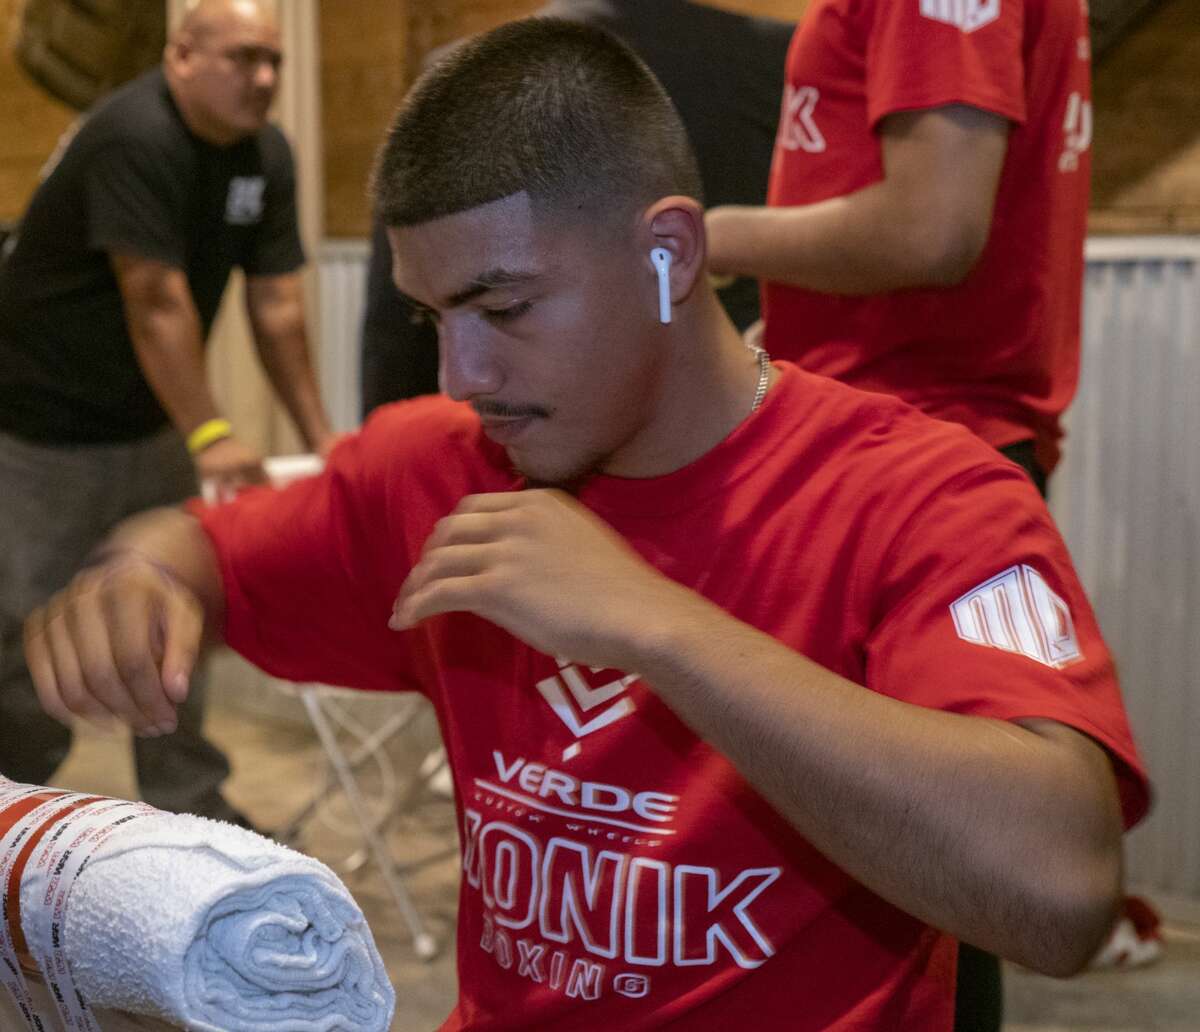 Michael Dutchover starts to get ready 09/20/19 night in the dressing rooms at The Hacienda Event Center, before his fight against Thomas Mattice. Tim Fischer/Reporter-Telegram